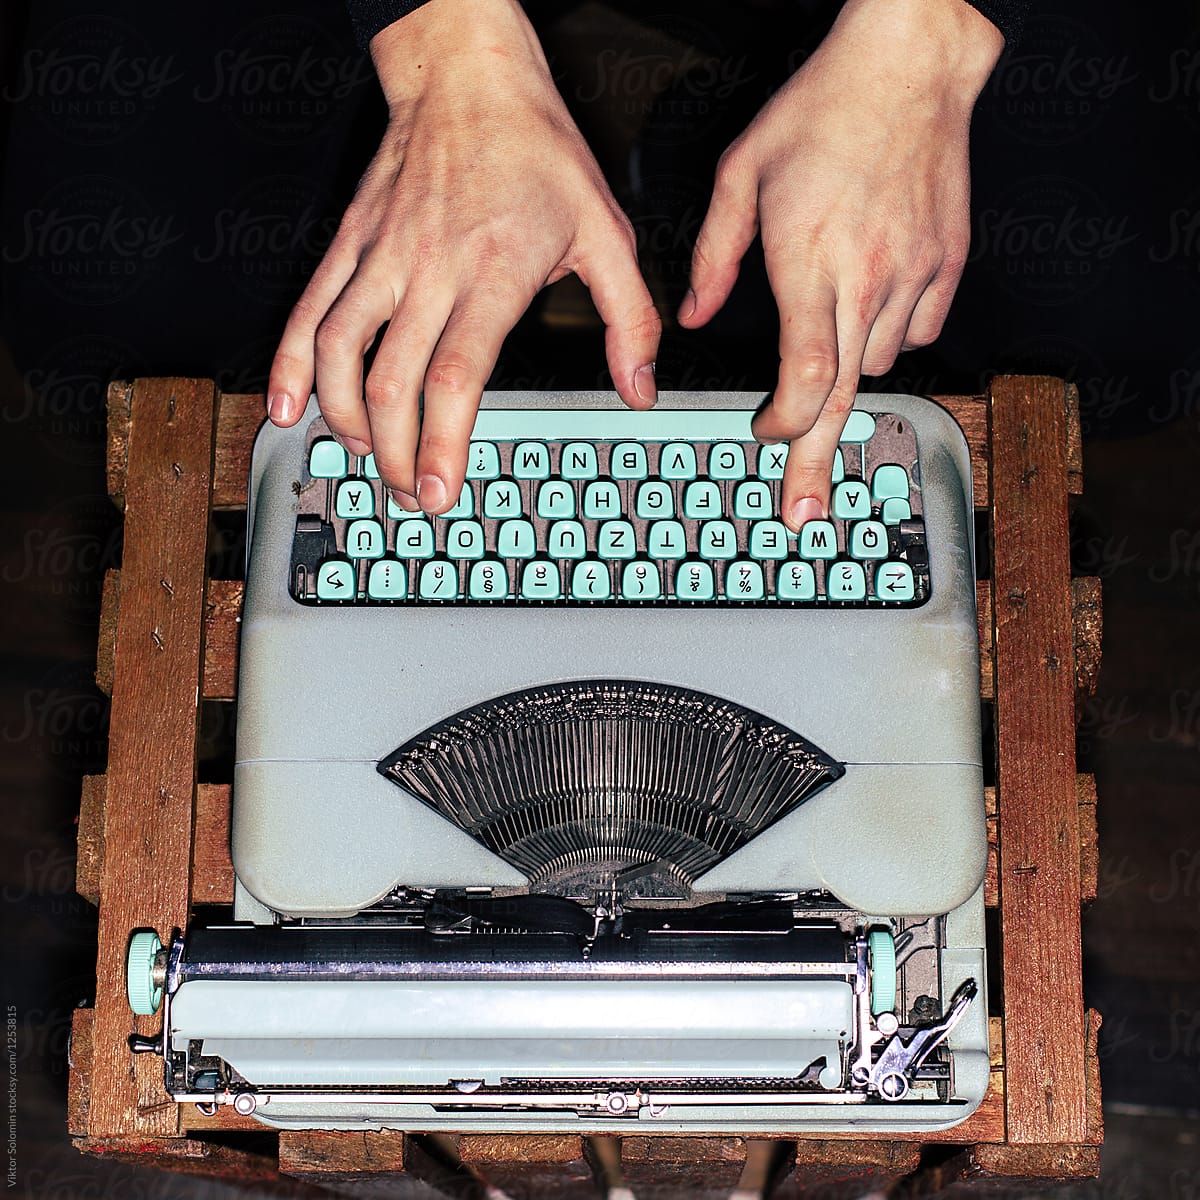 Hands closeup typing on blue vintage typewriter standing on wooden box